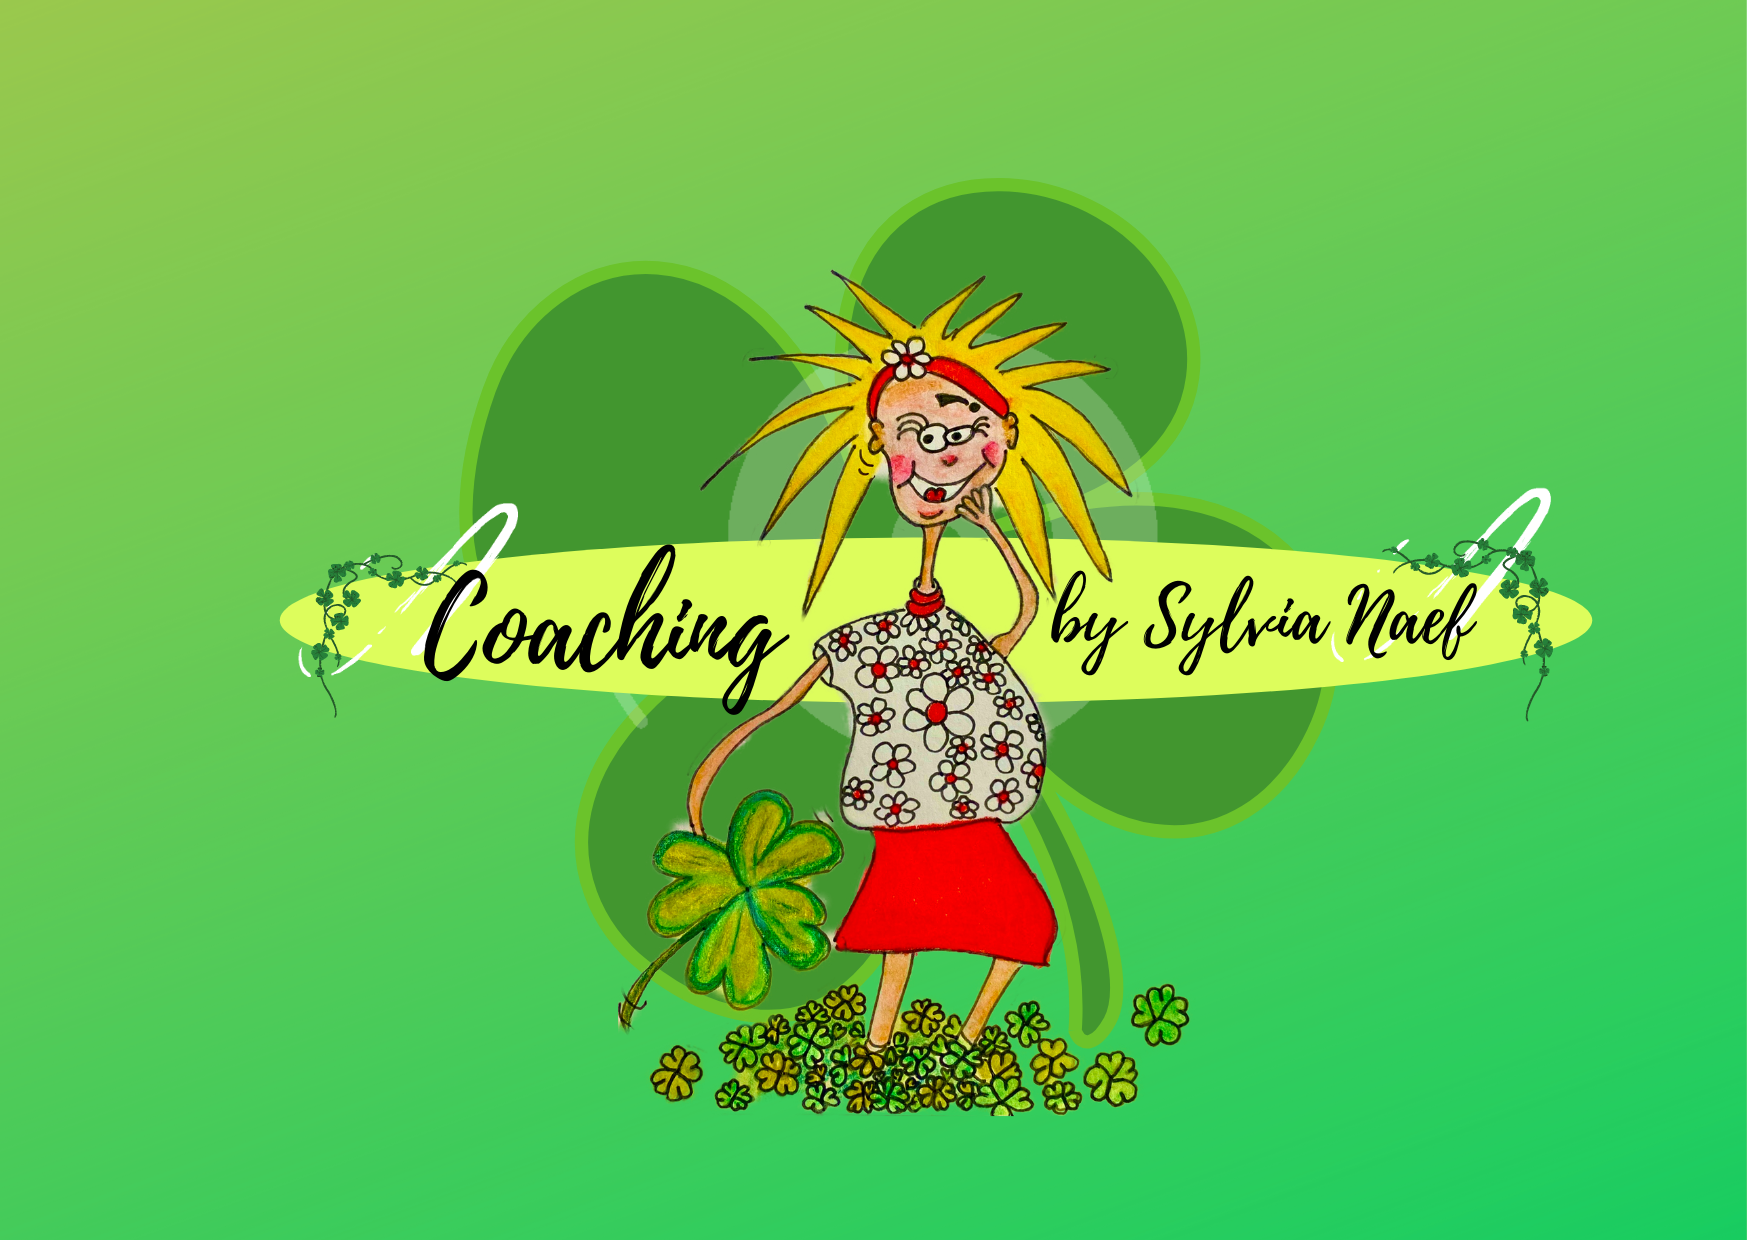 Coaching by Sylvia Naef